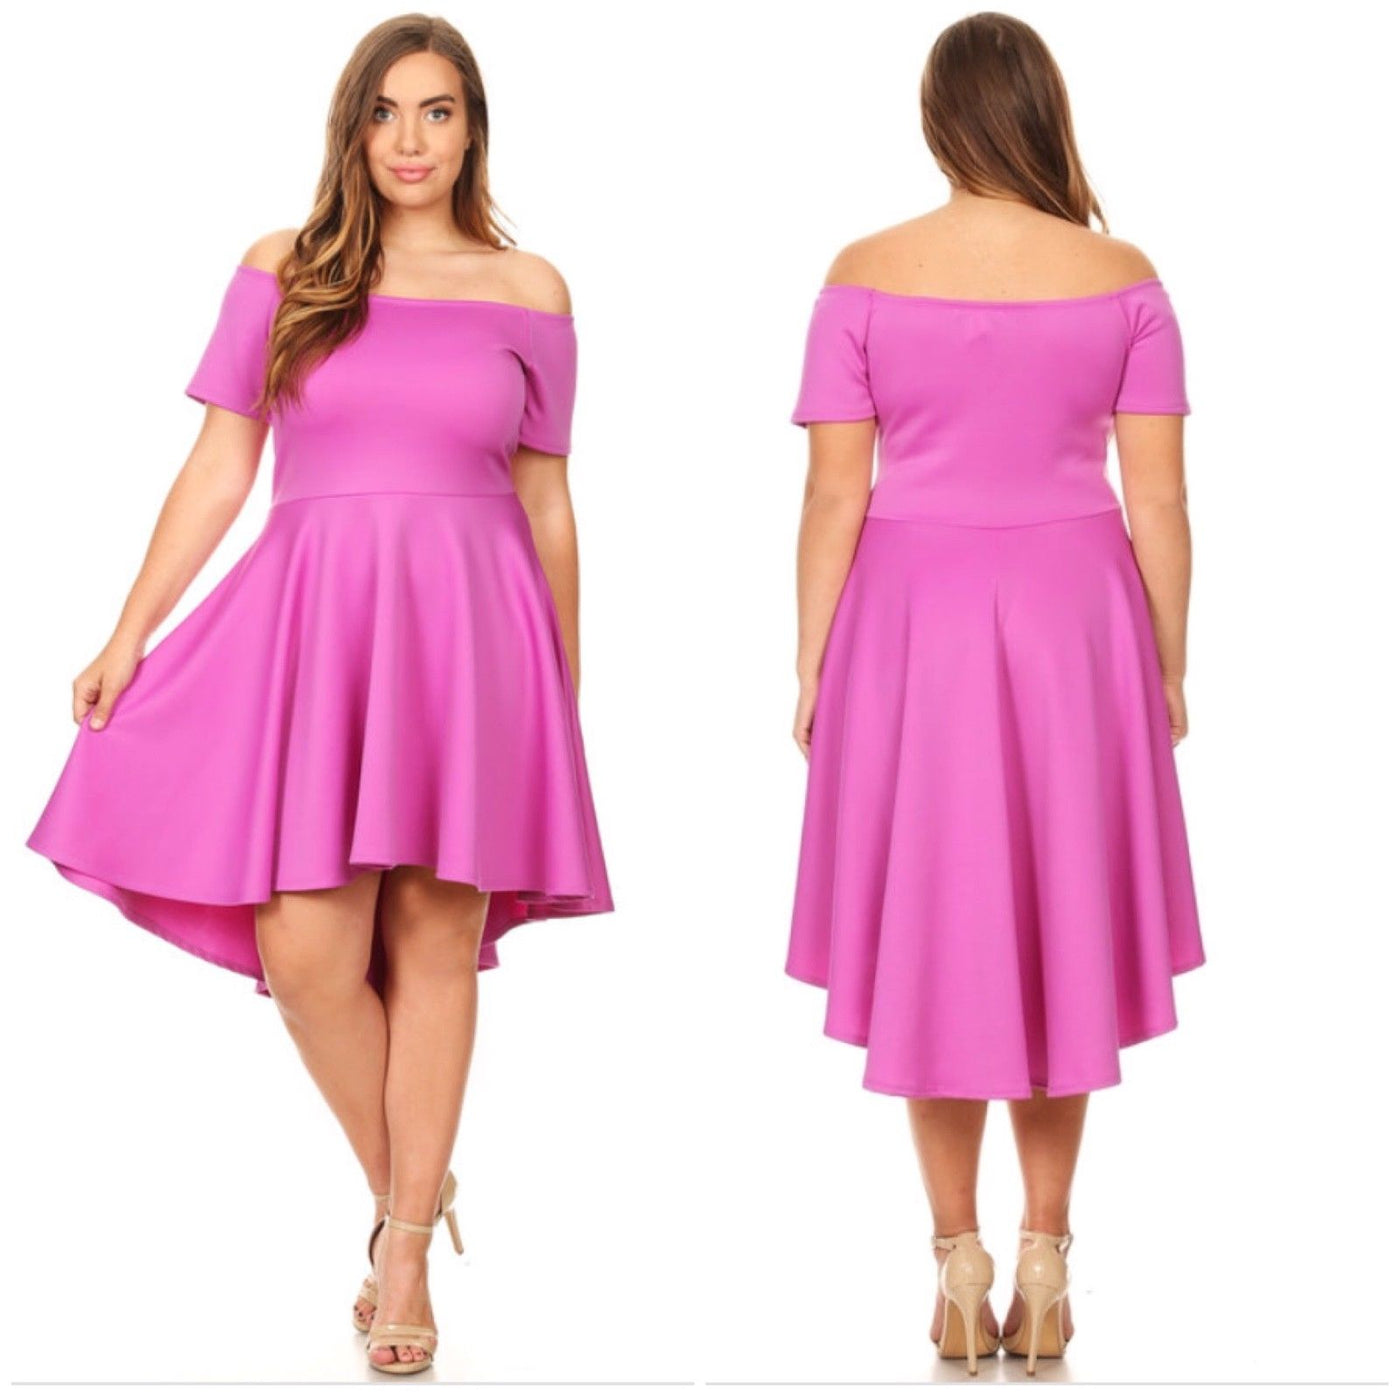 Plus Pink Dress Off Shoulder Hi Lo Short Sleeve Solid Cocktail Sexy Party